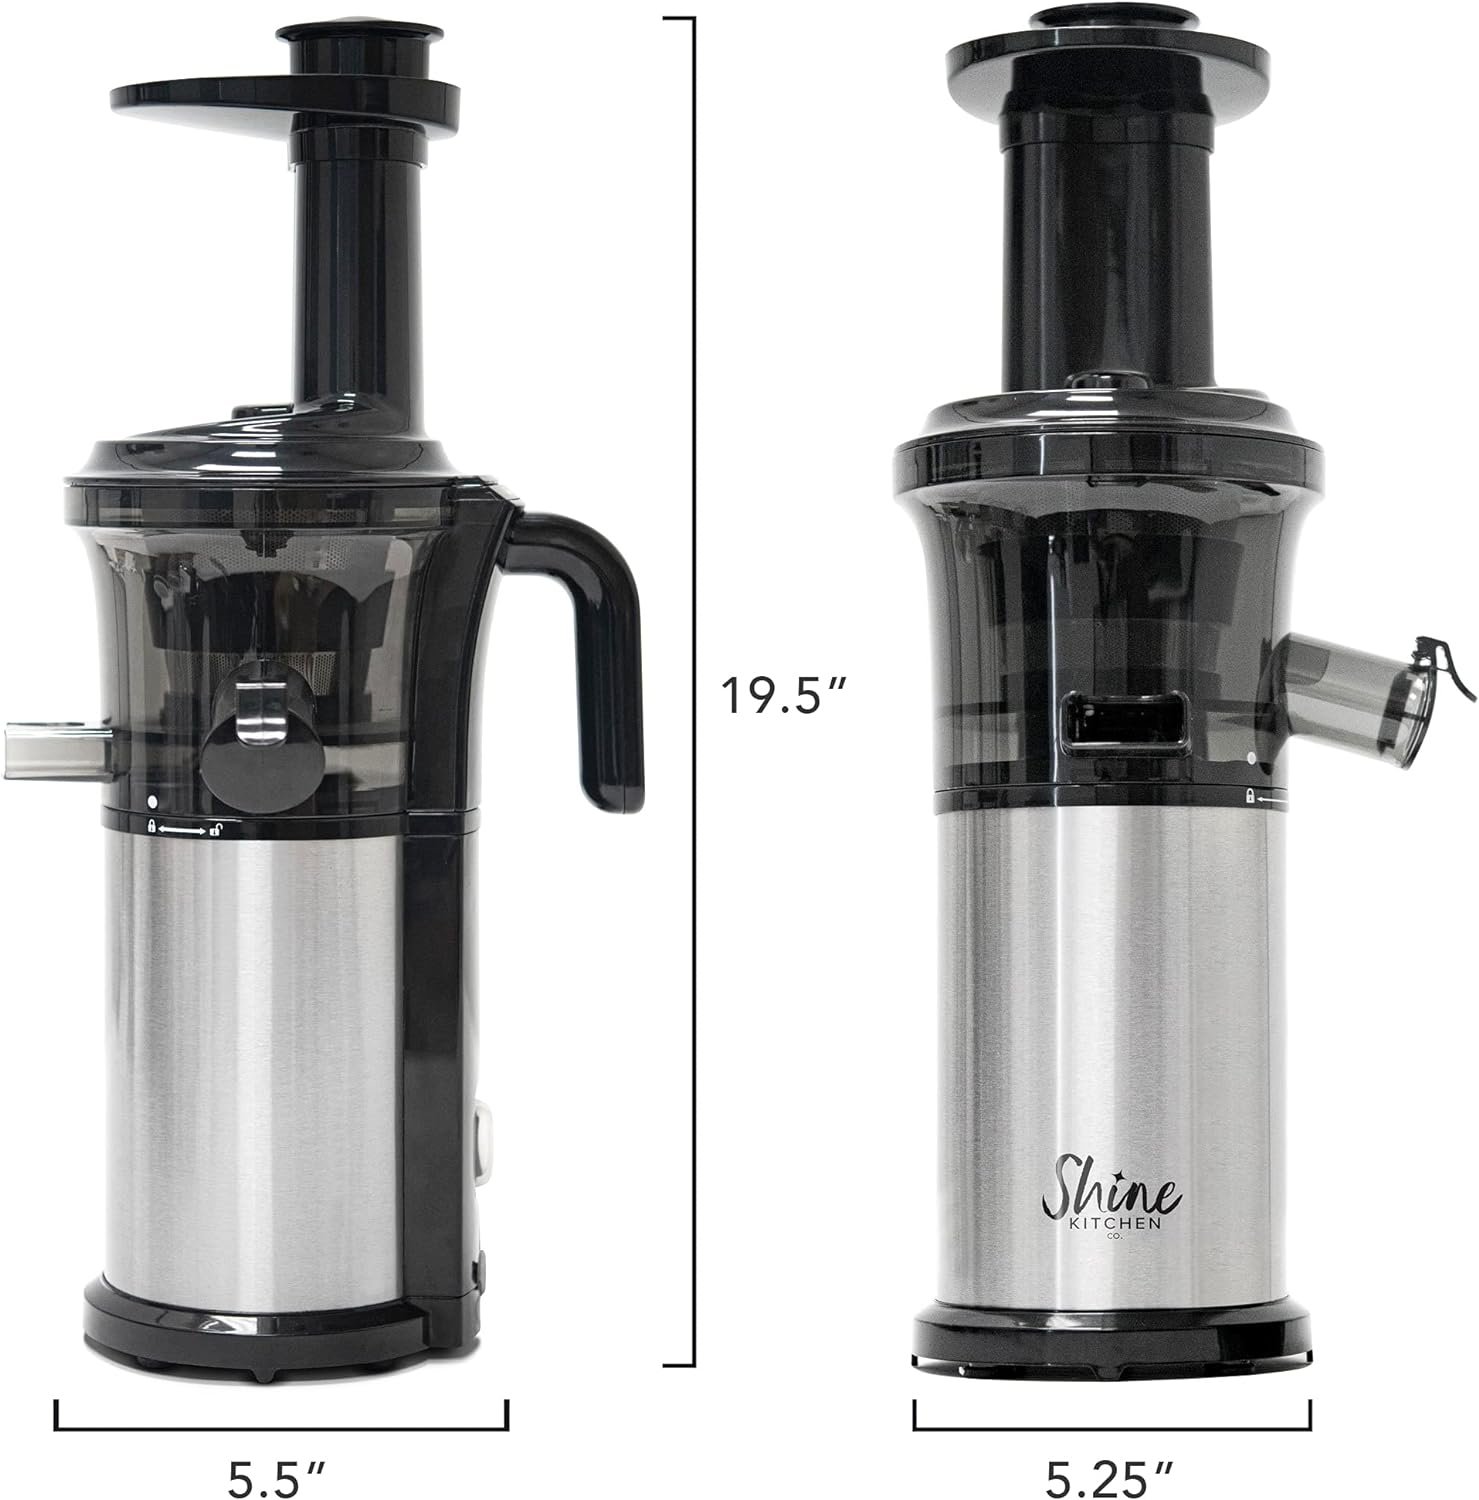 Shine Kitchen Co SJV-107-A Cold Press Slow Masticating Juicer, Stainless Steel